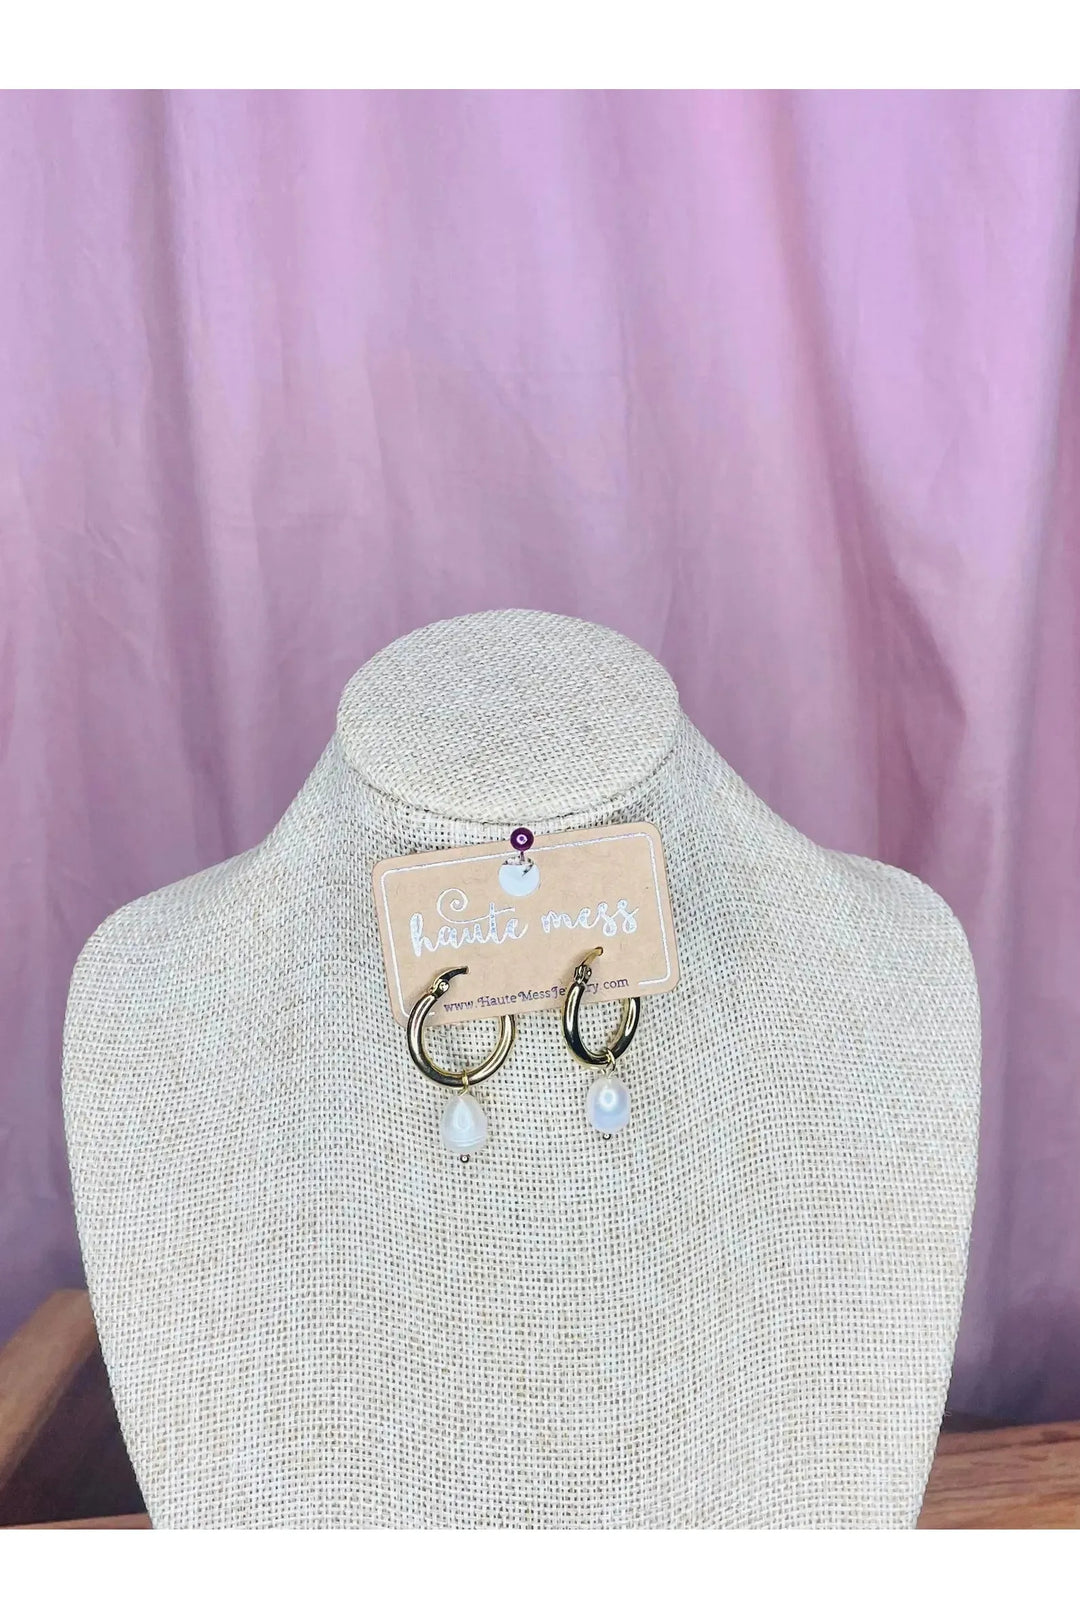 Gold Hoop with Freshwater Pearl Drop Earring - Vintage Dragonfly Boutique